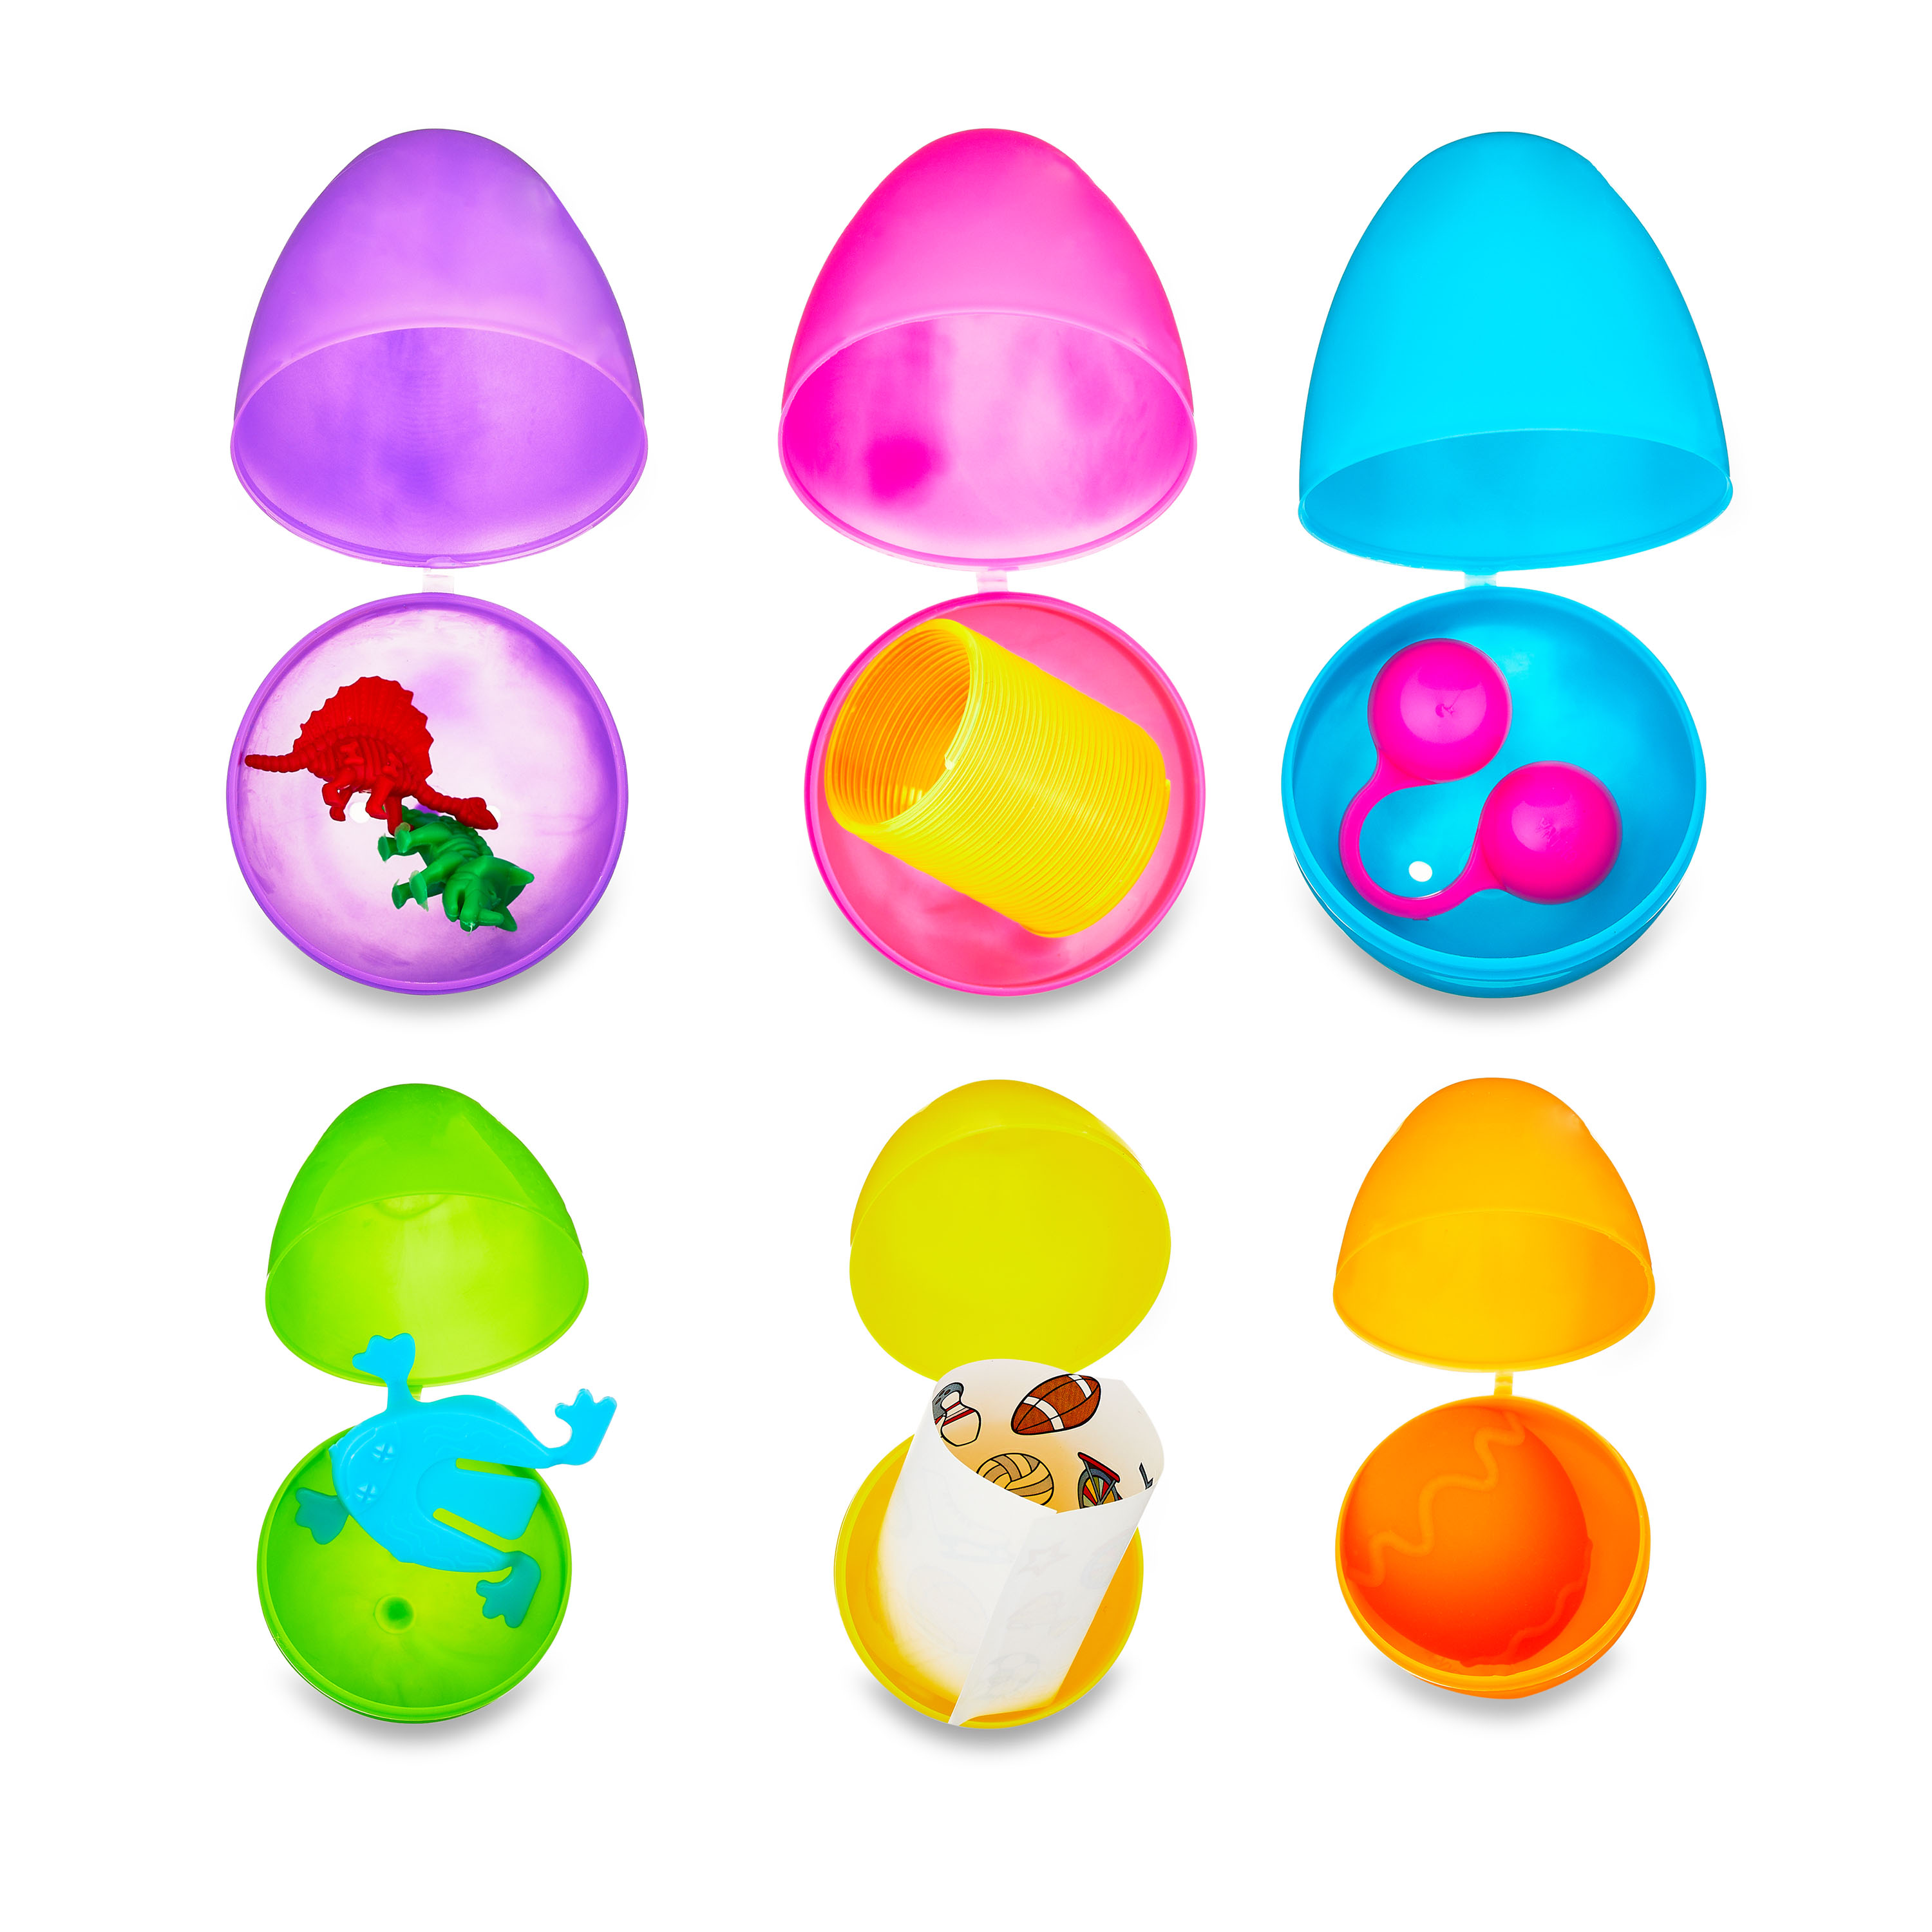 Multicolor Prefilled Plastic Easter Egg Party Favors, 50 Count, by Way To Celebrate - image 2 of 5